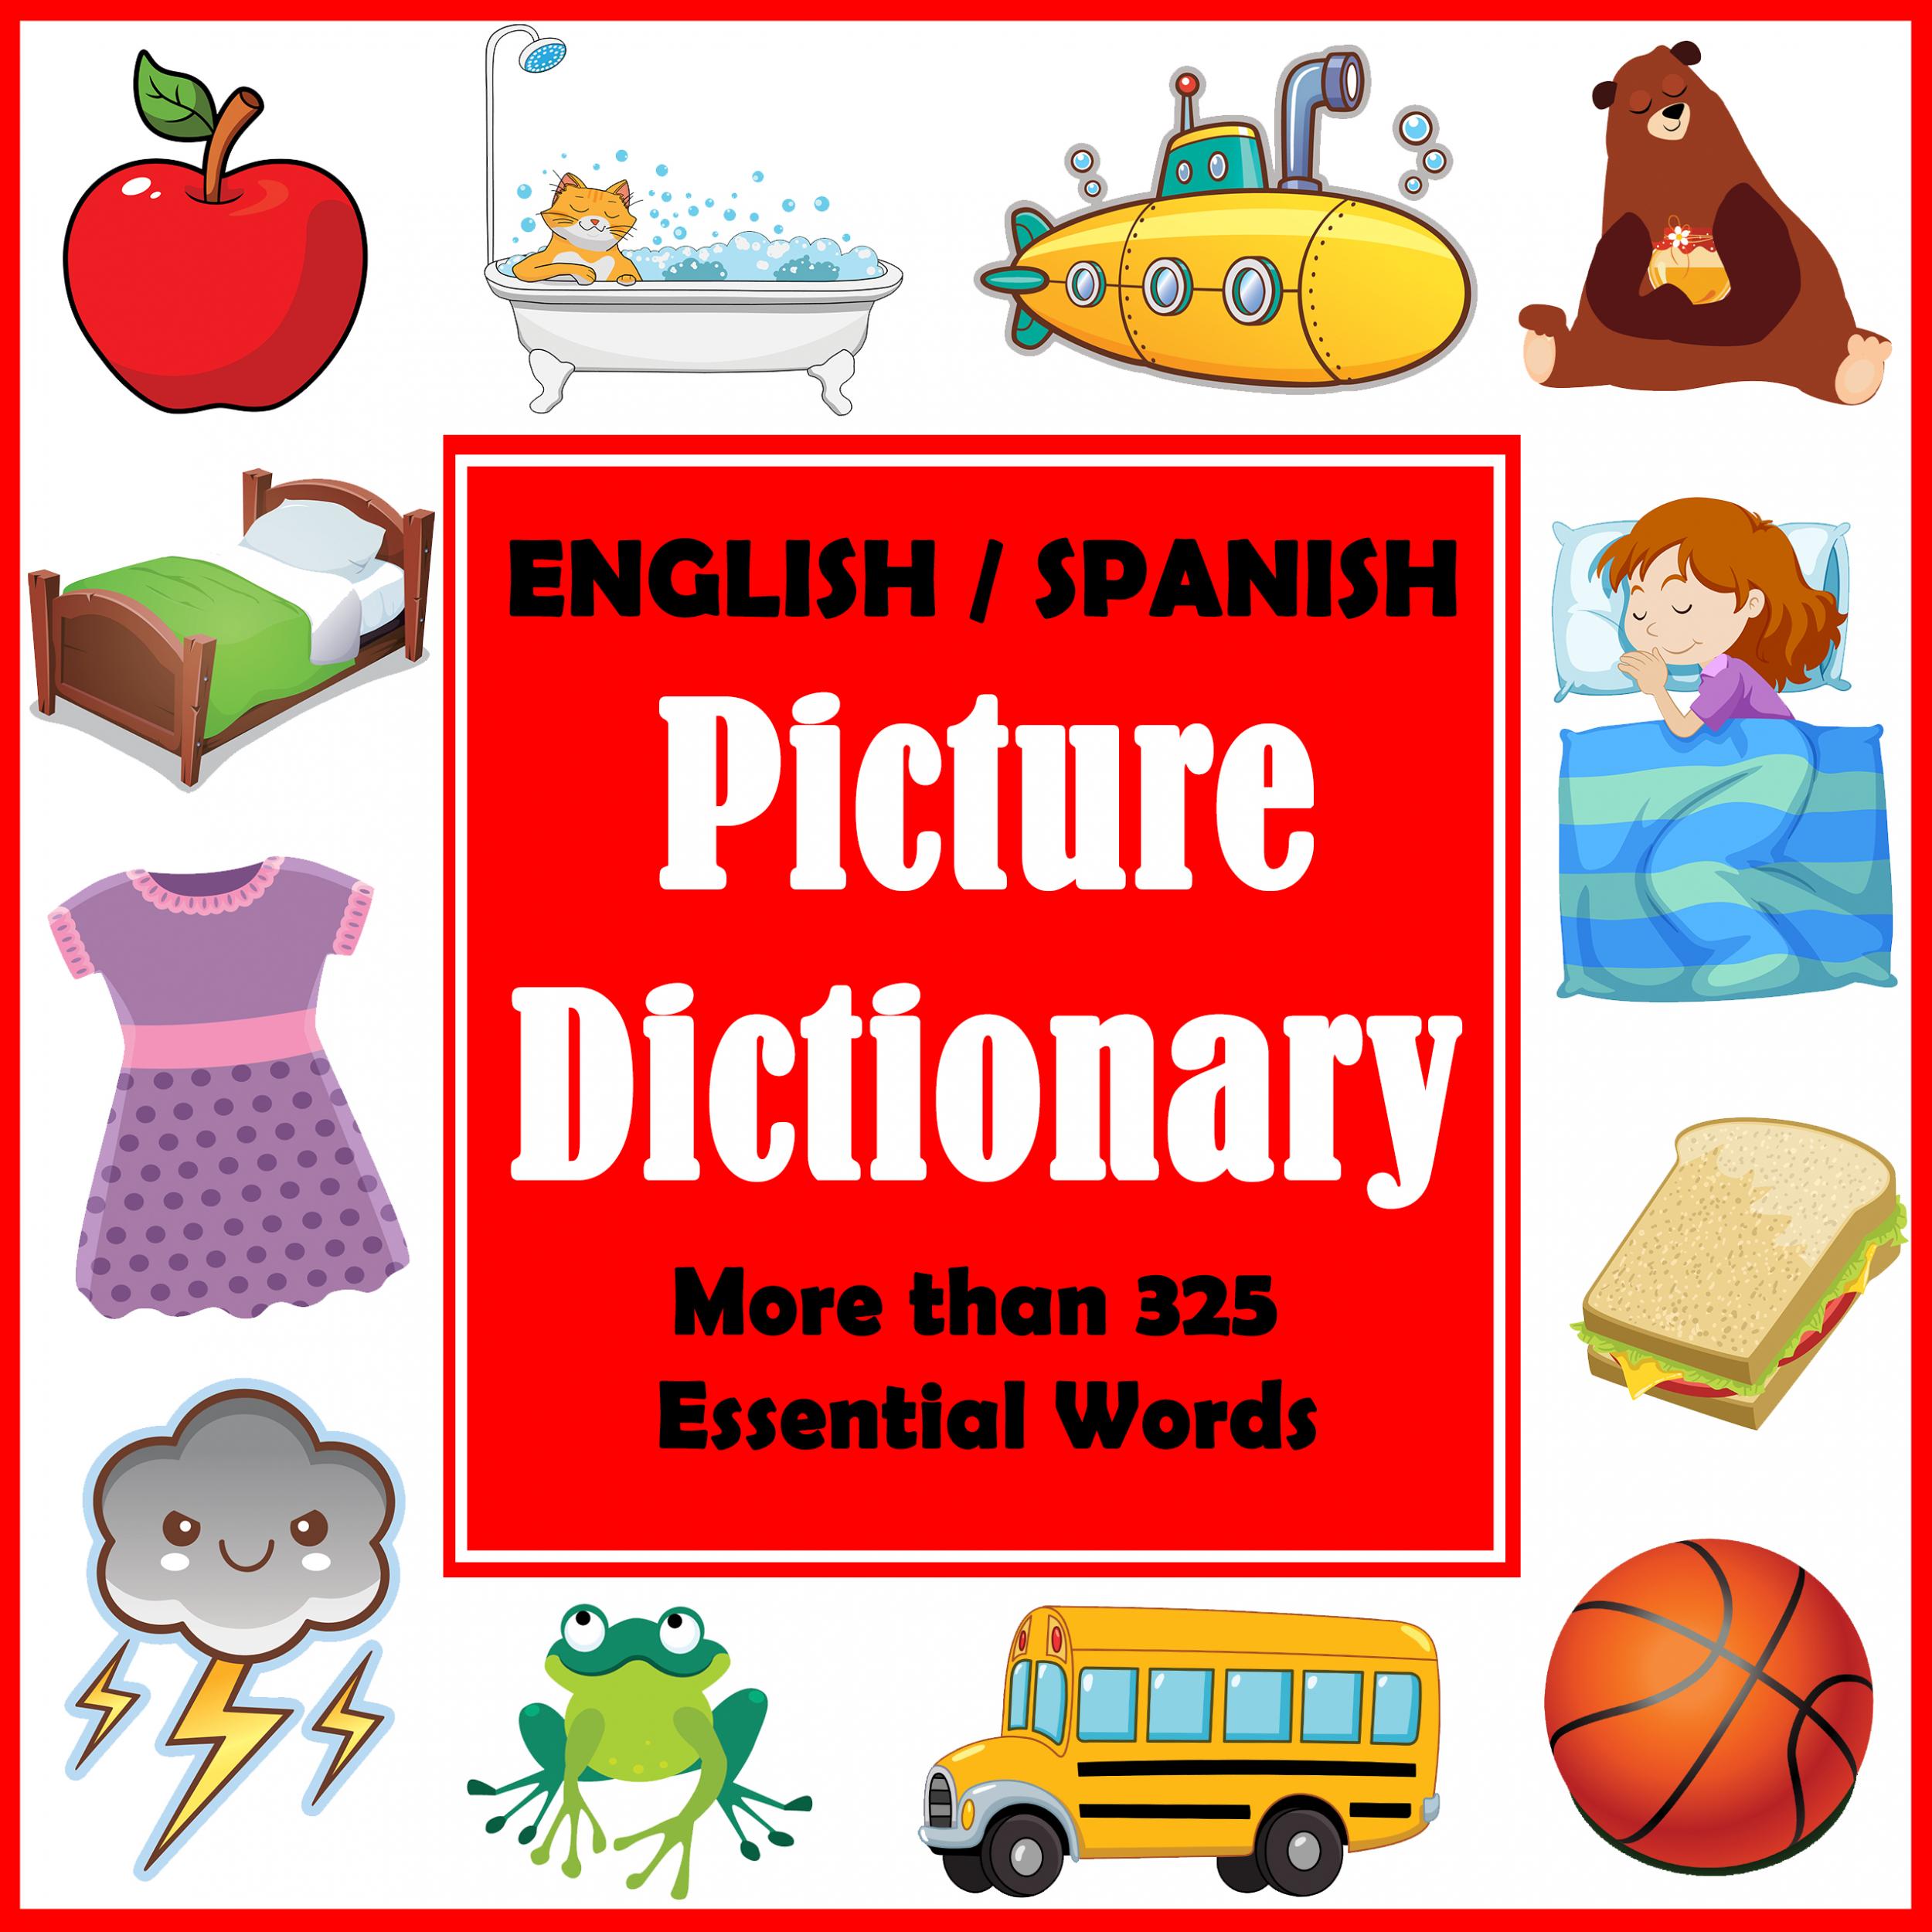 Word book английский. English picture Dictionary. Spanish Dictionary pictures. Испанский английский. English Word book.